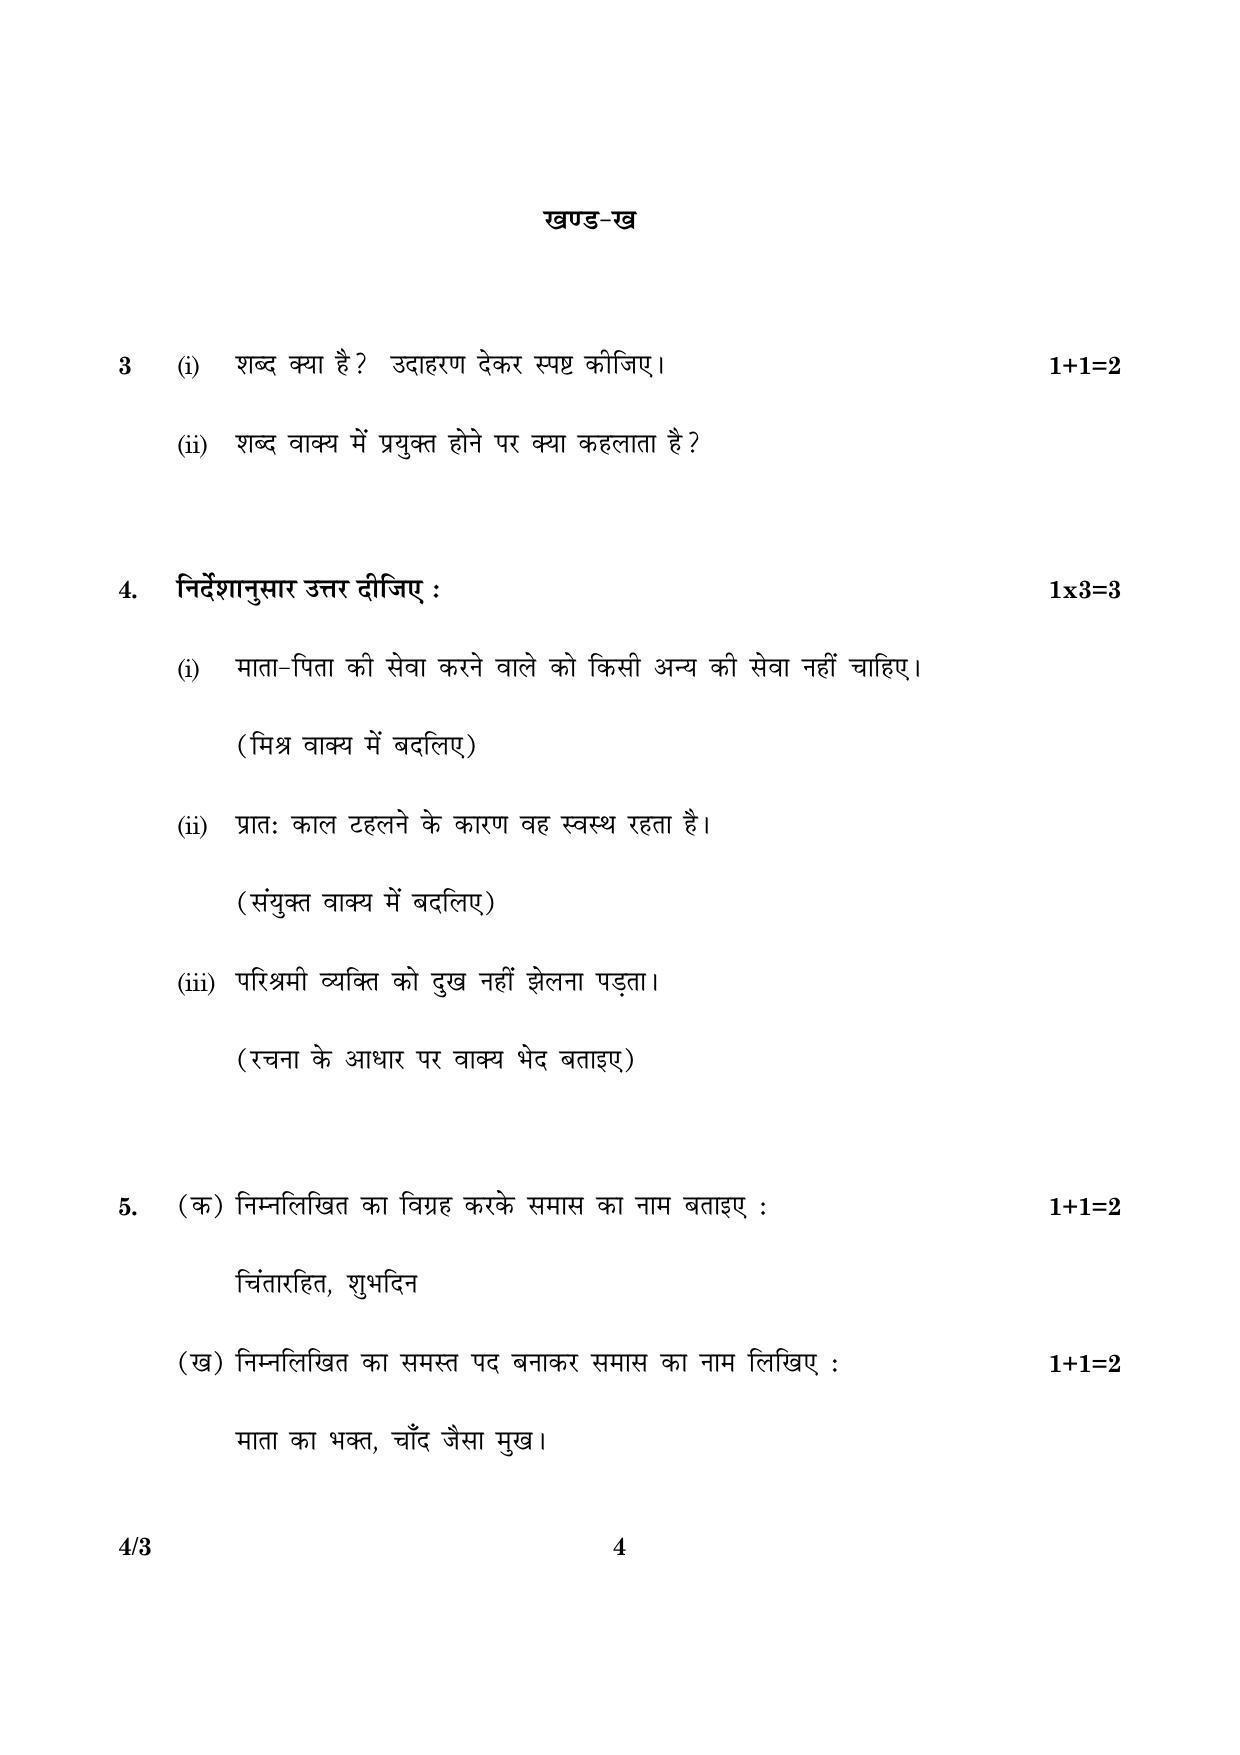 CBSE Class 10 004 Set 3 Hindi Course B 2016 Question Paper - Page 4